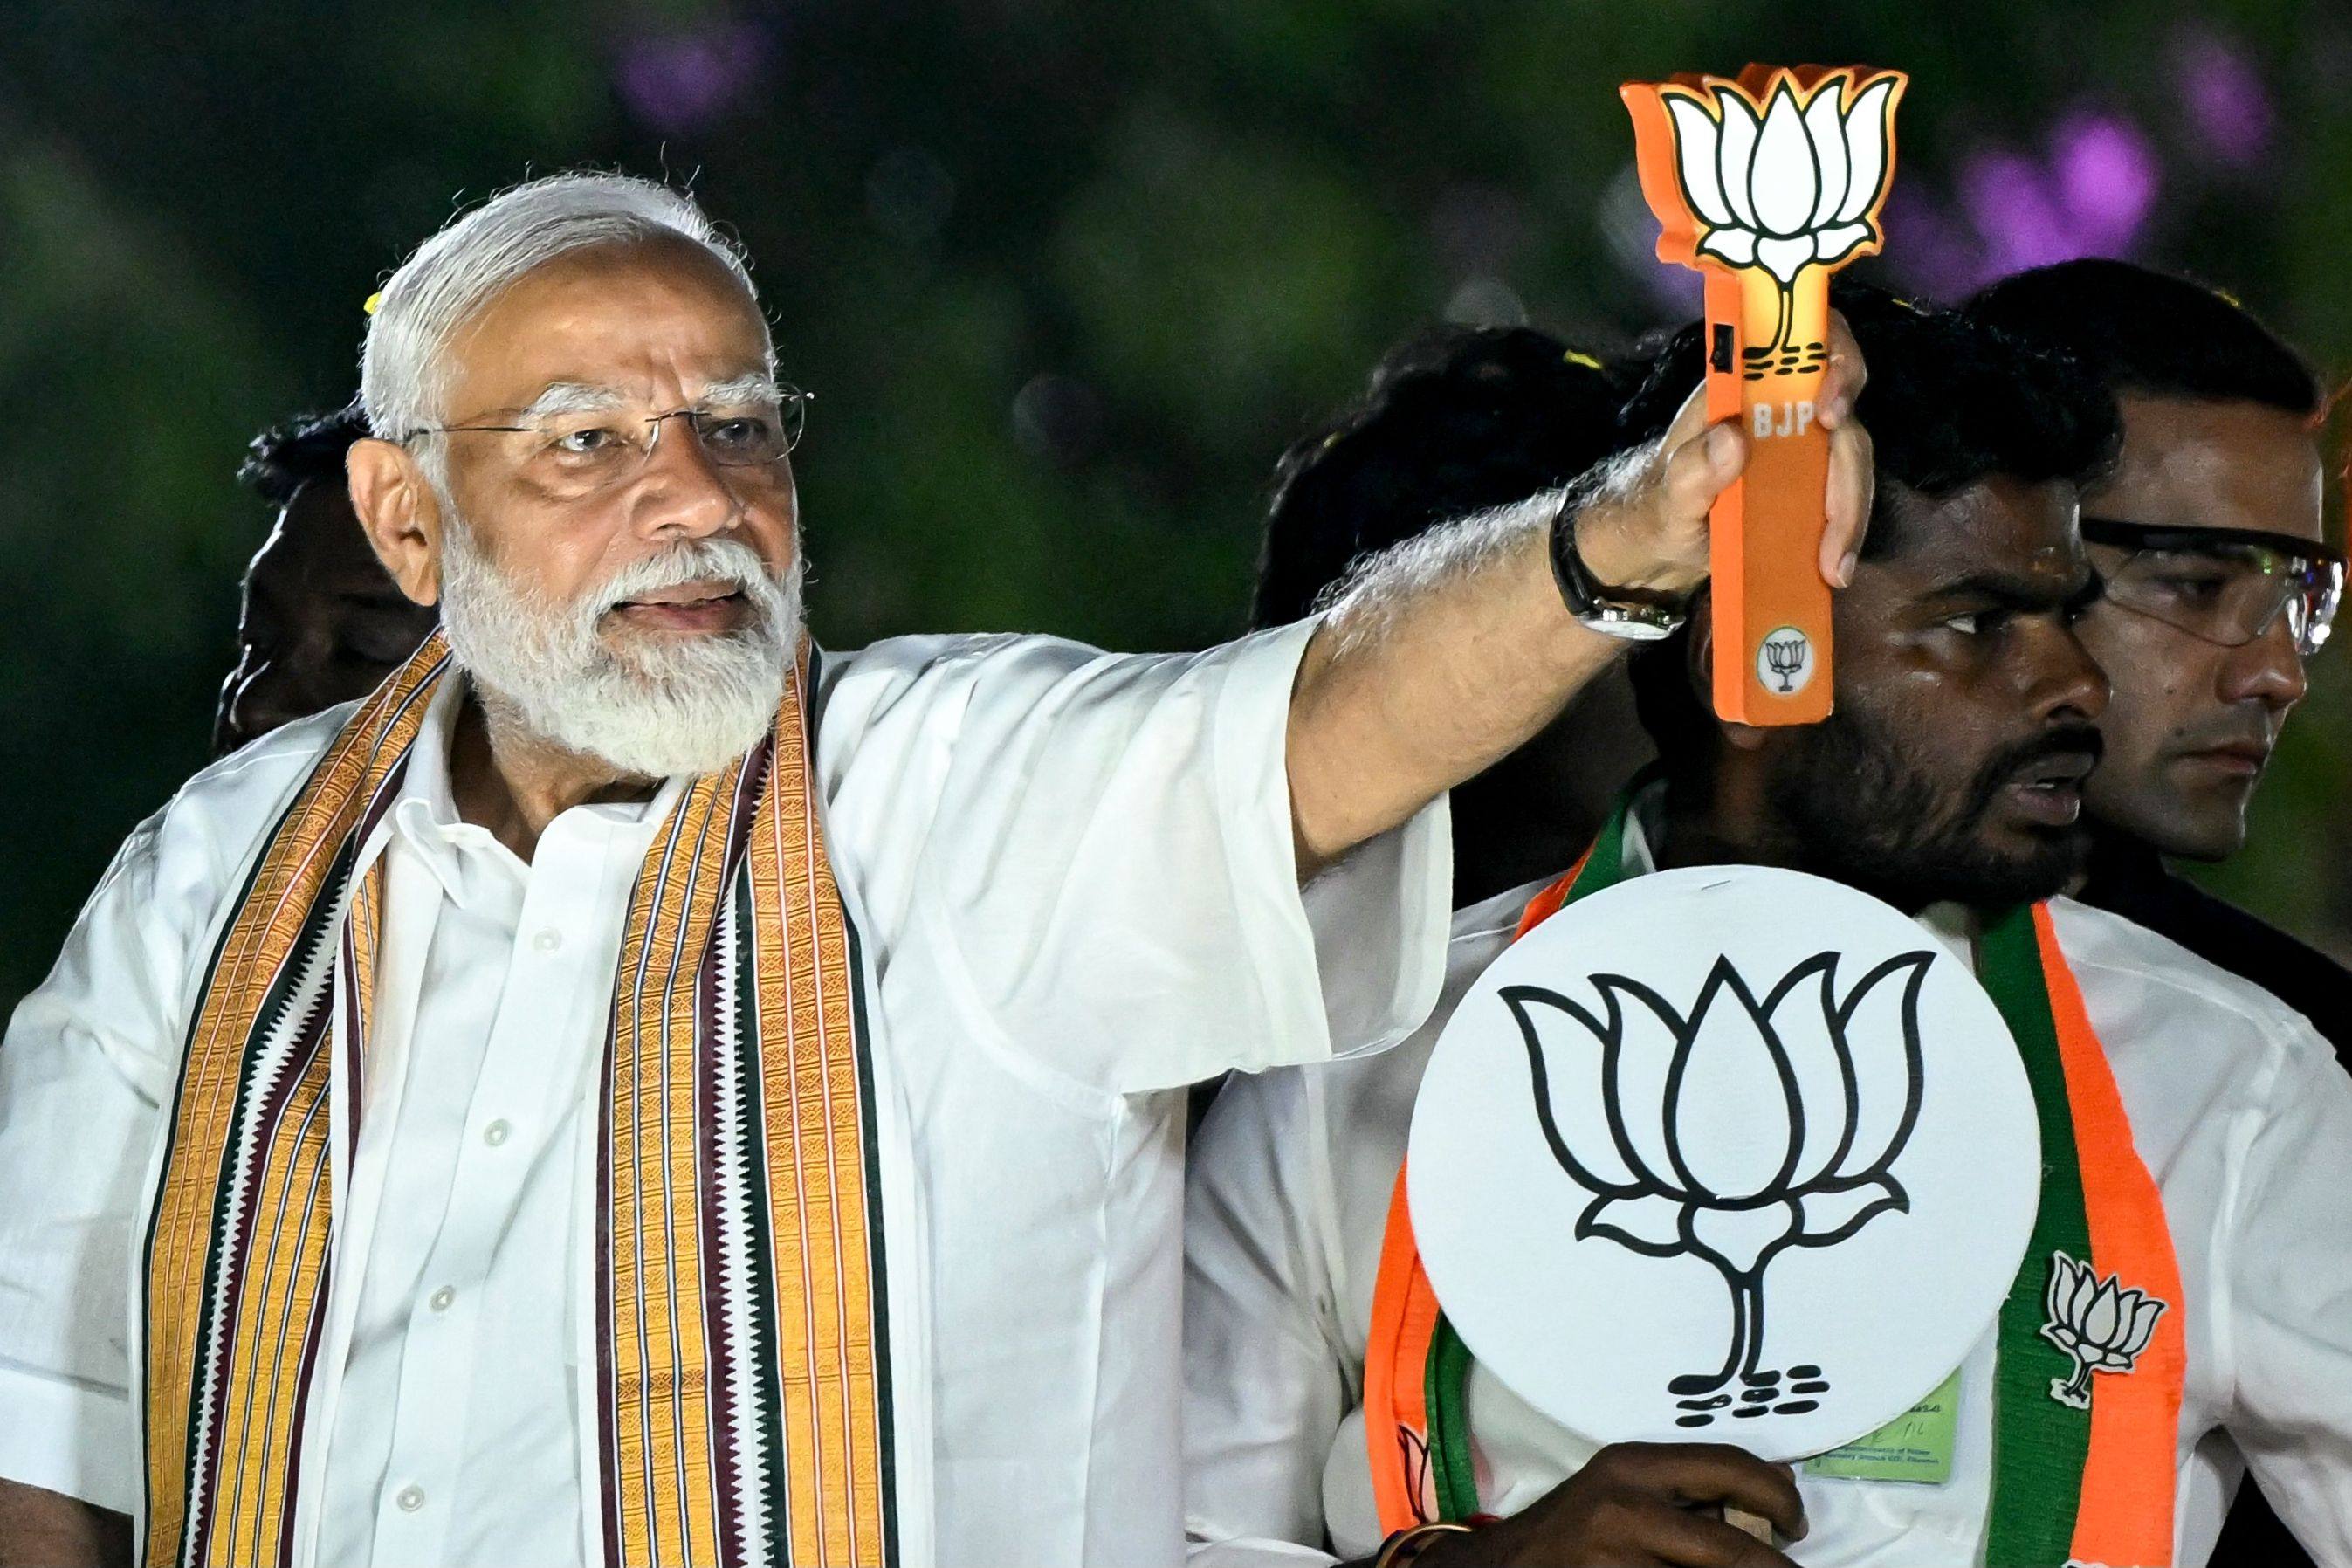 Narendra Modi, India’s Prime Minister and leader of the ruling Bharatiya Janata Party, holds the party symbol during a campaign rally. Photo: AFP/File